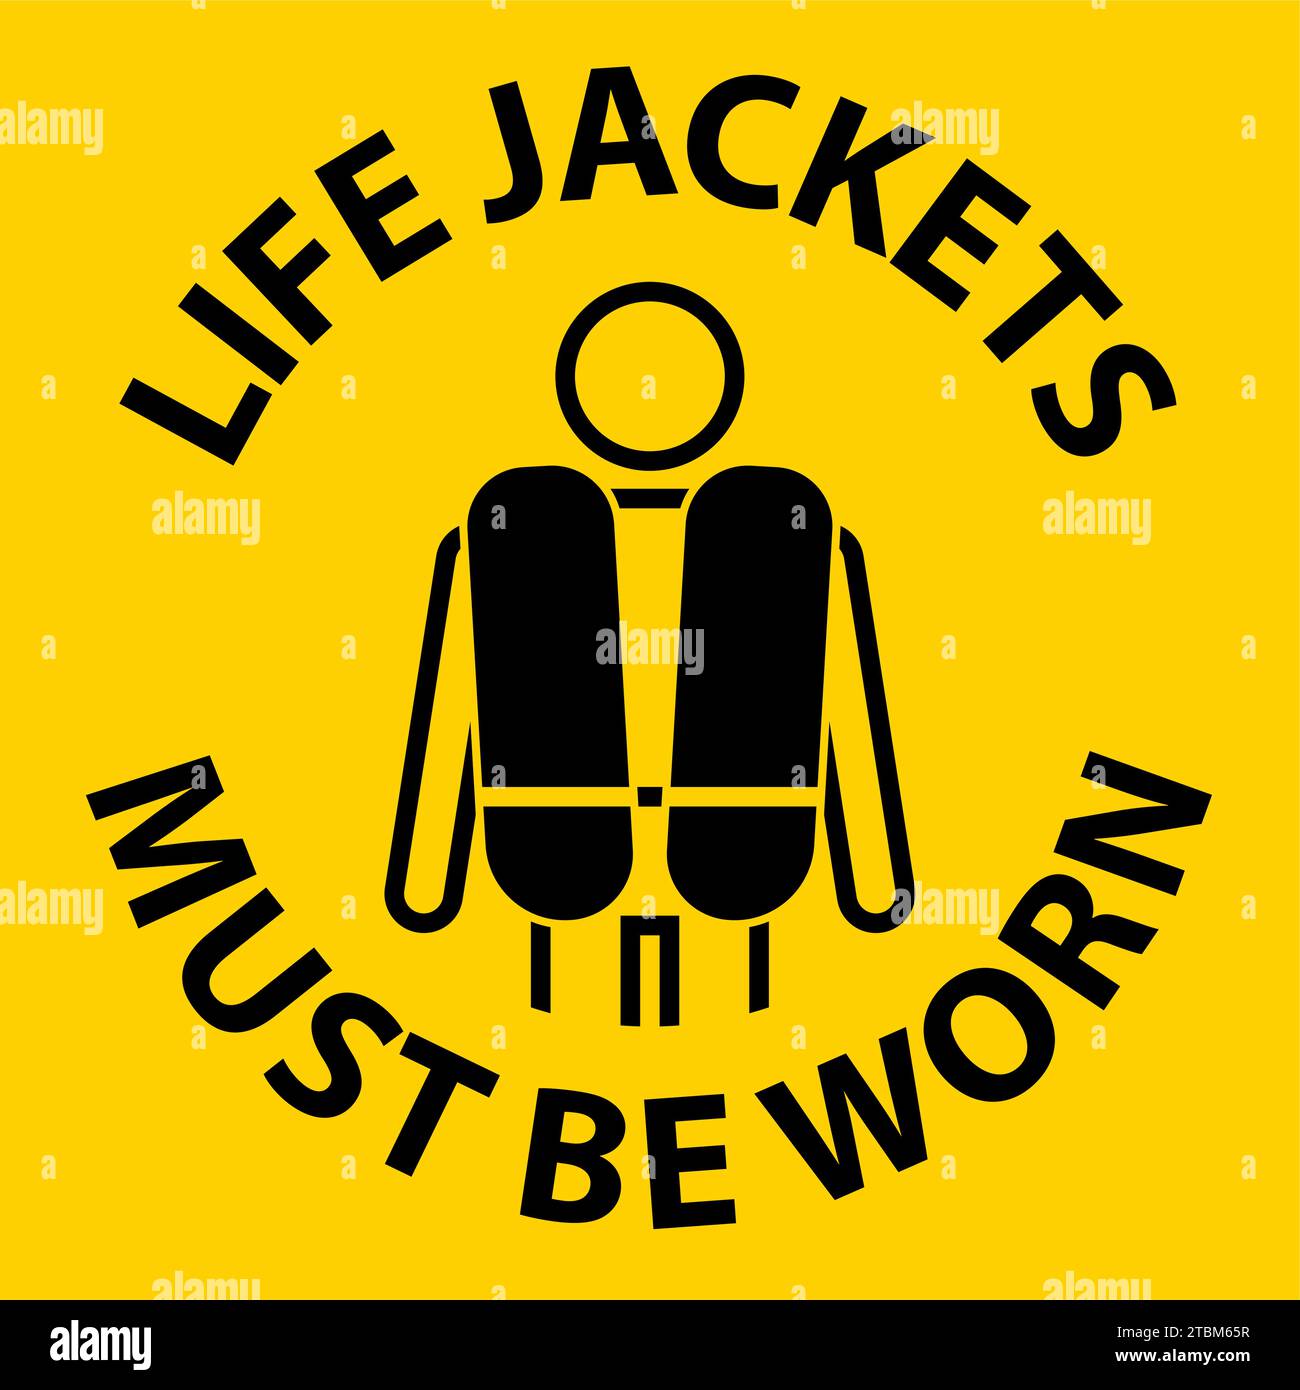 Water Safety Sign Caution, Life Jackets Must Be Worn Stock Vector